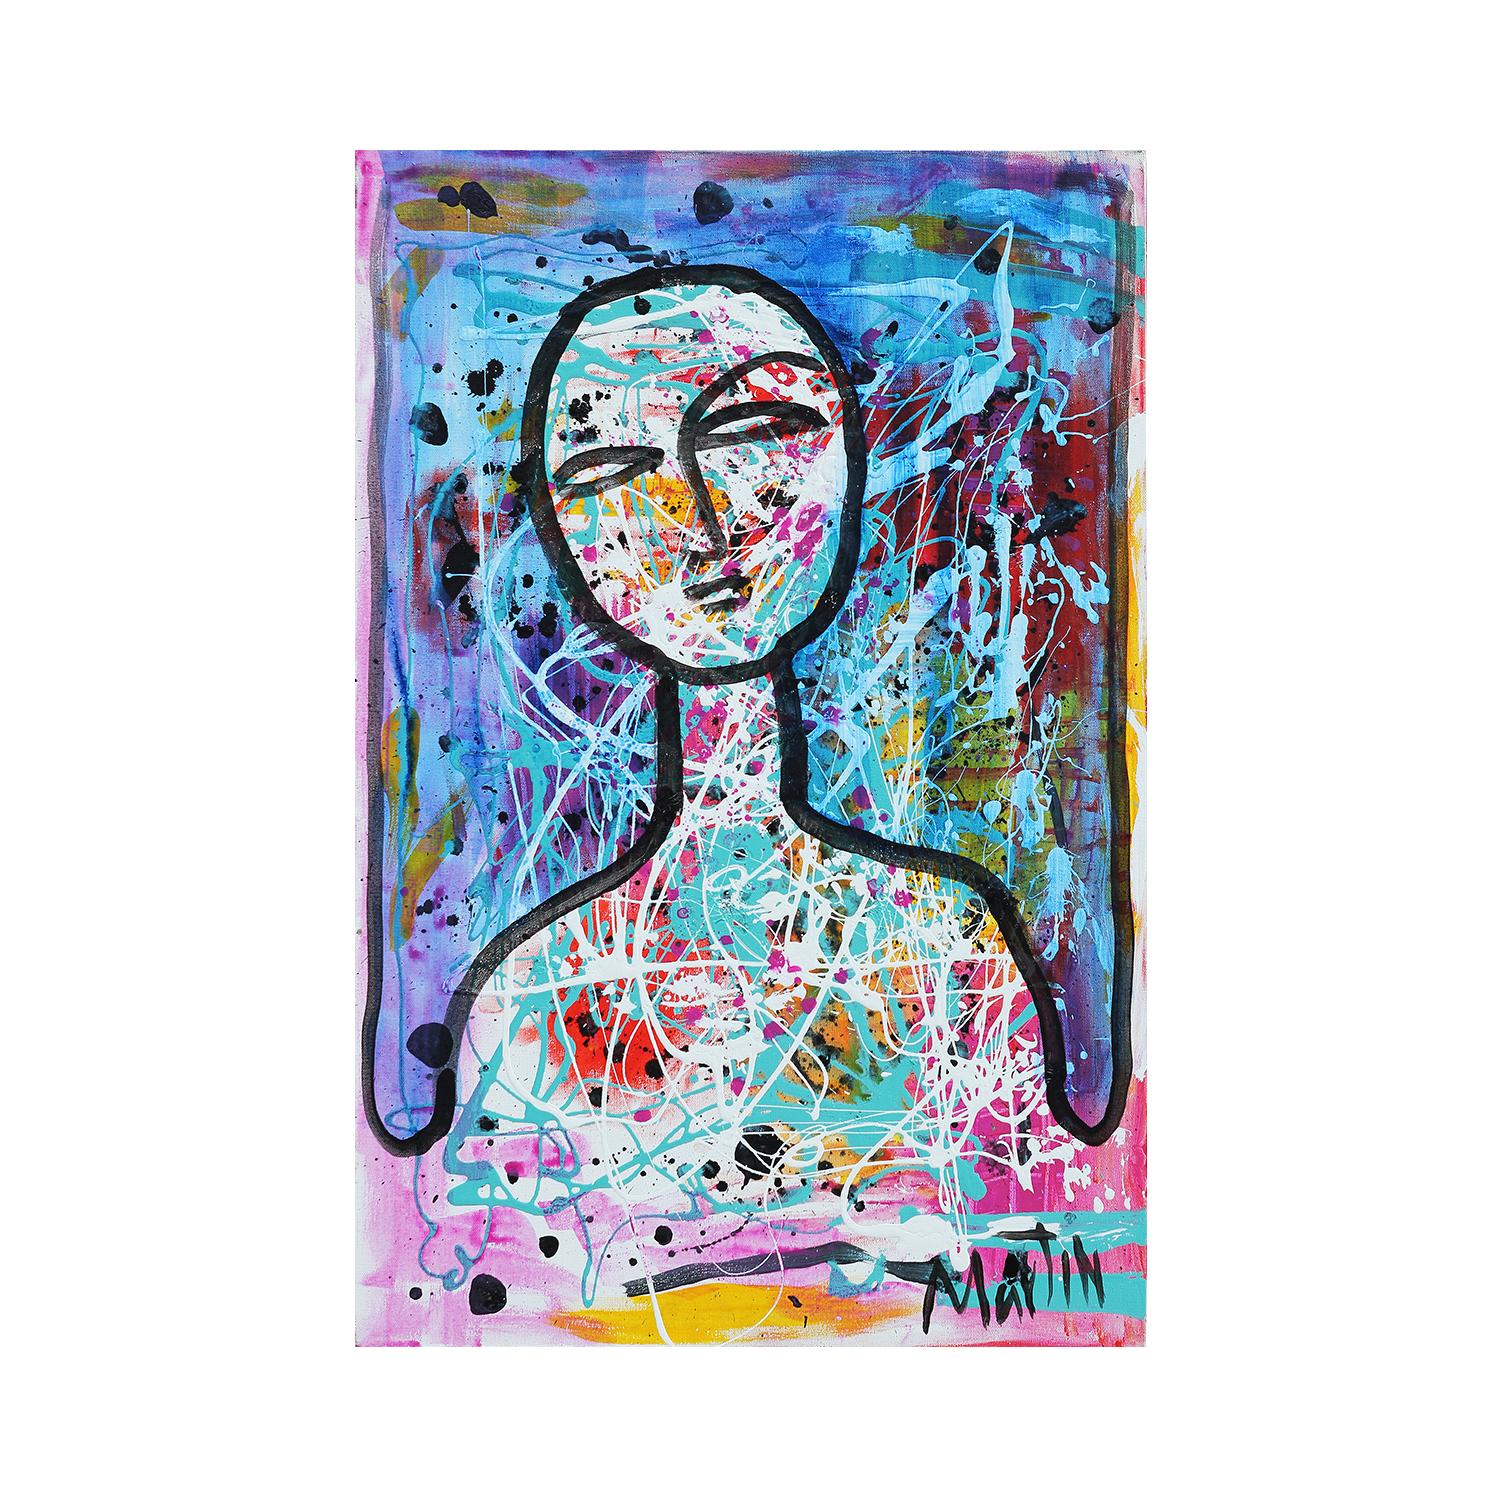 Contemporary Blue, Pink, and White Abstract Expressionist Portrait Painting - Gray Abstract Painting by Larry Martin